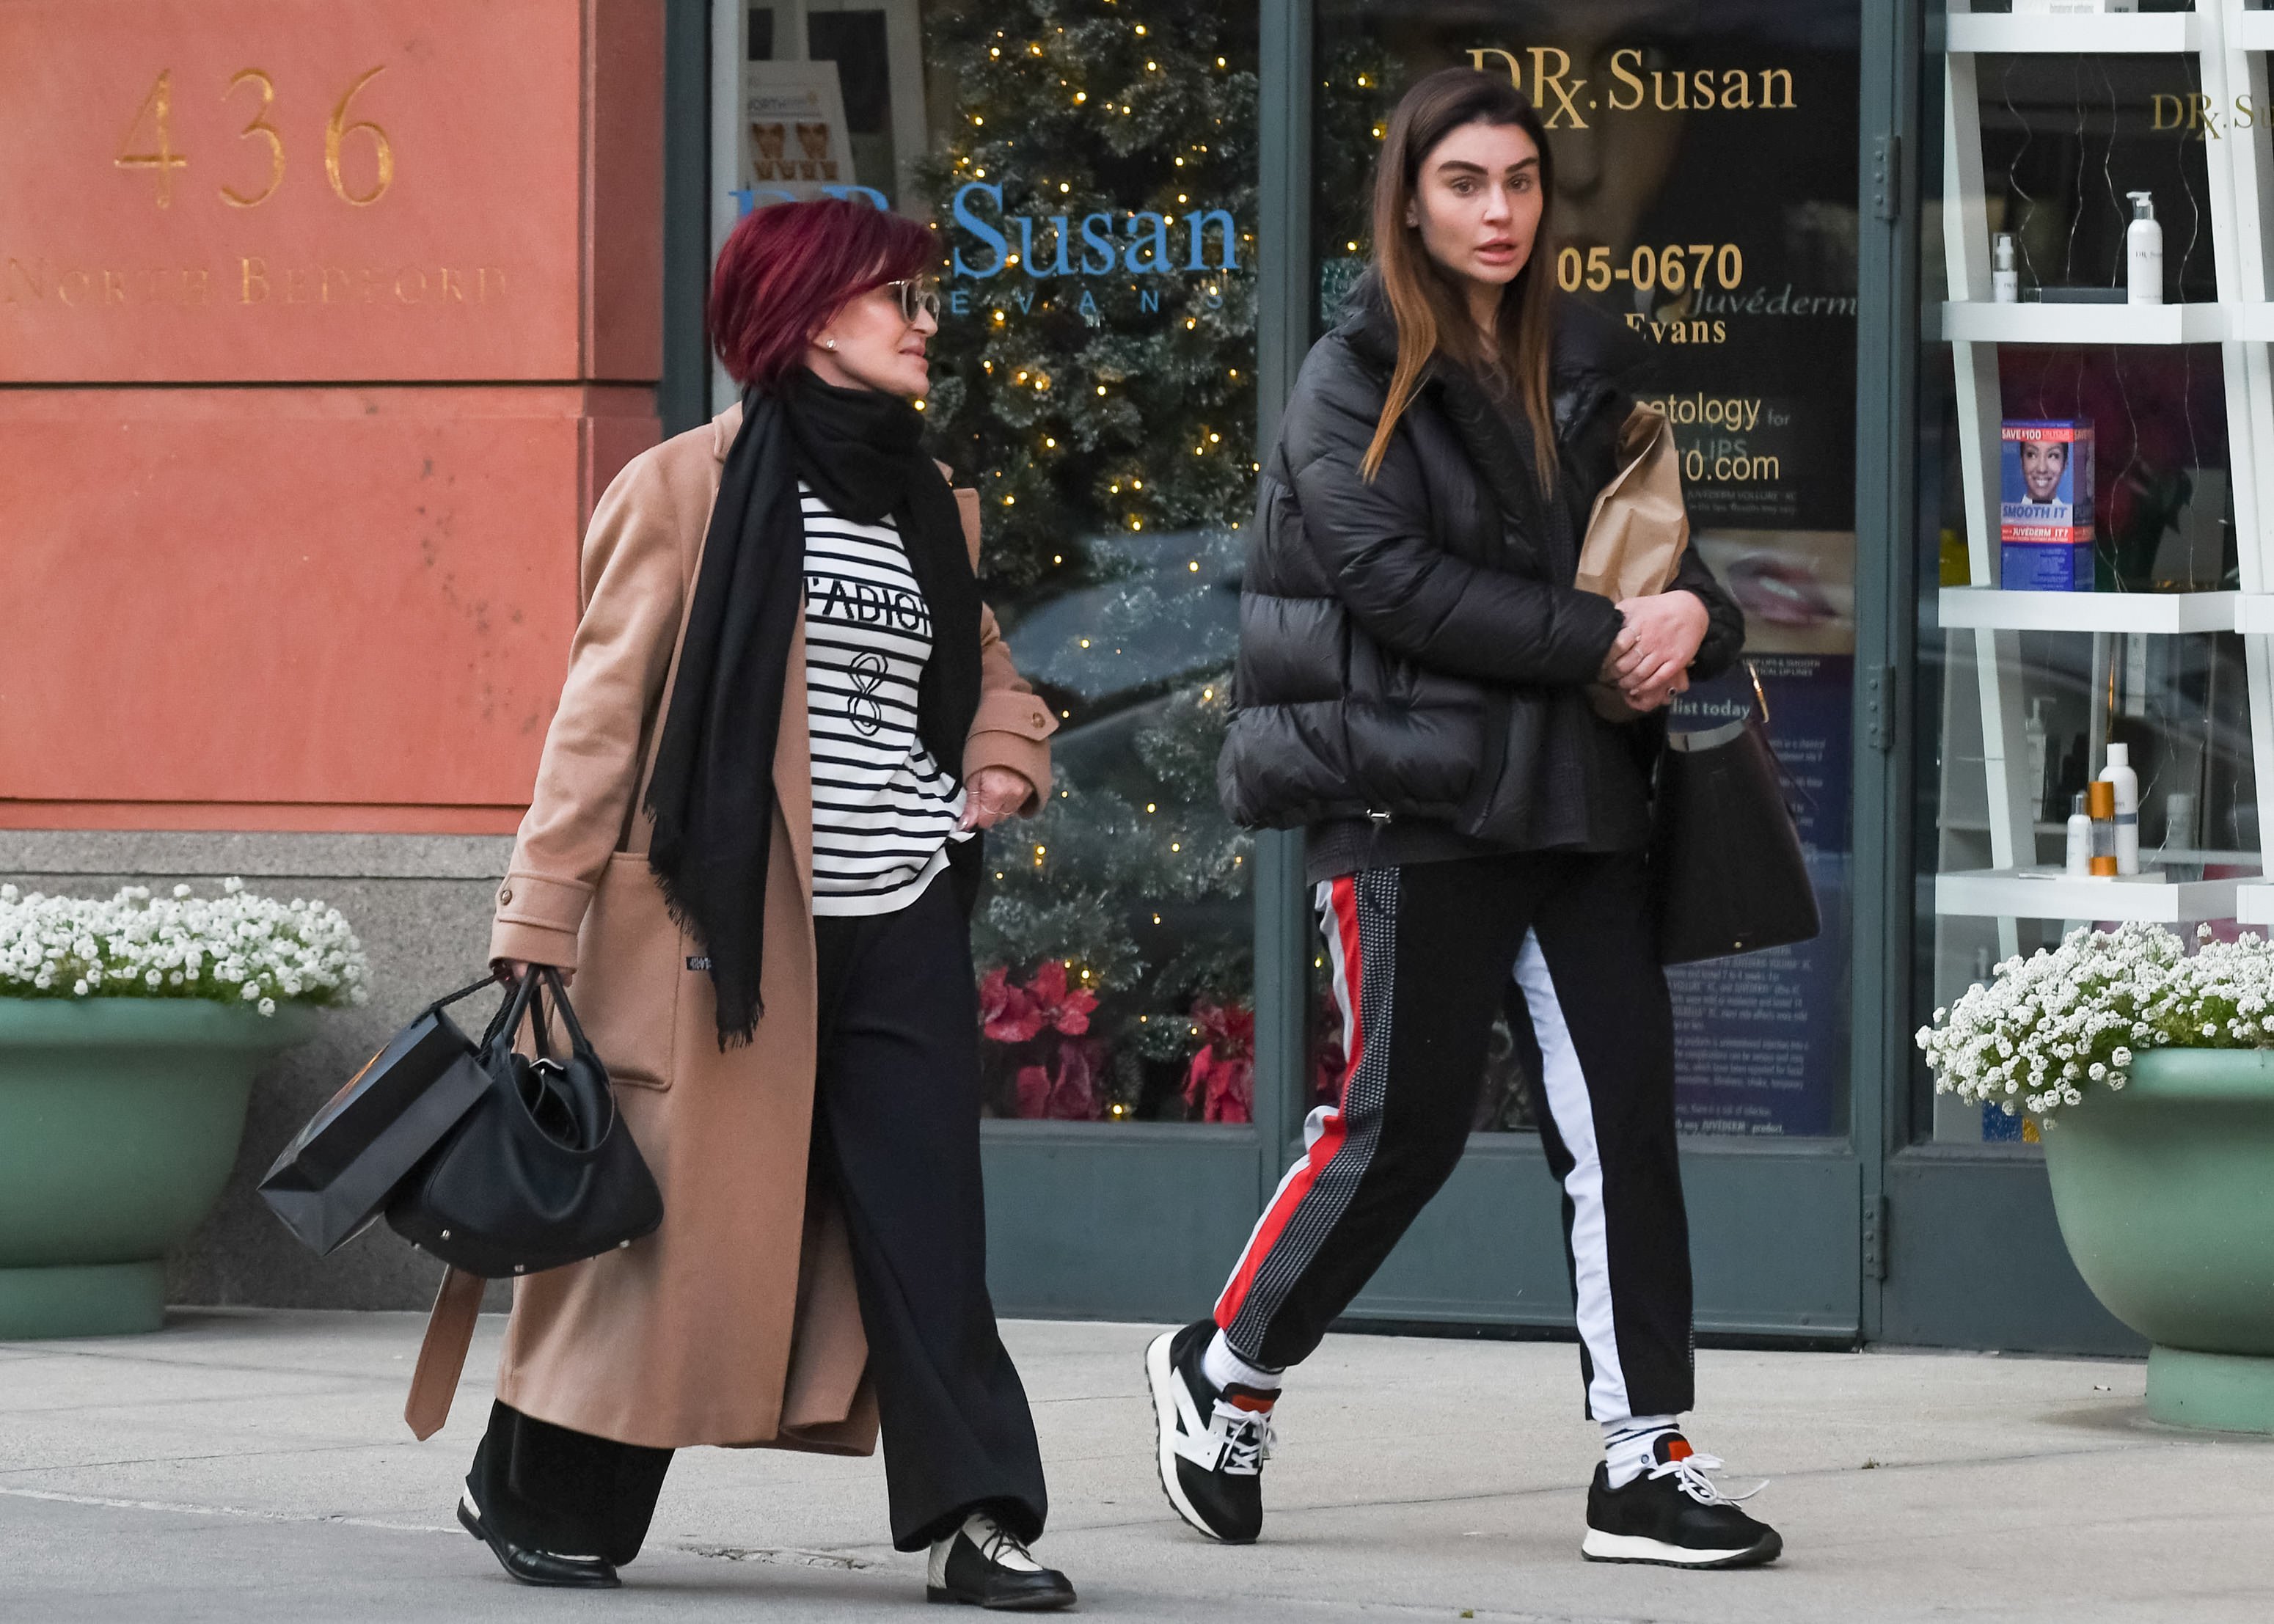 Sharon Osbourne and her daughter, Aimee Osbourne spotted on January 8, 2020 in Los Angeles, California. | Source: Getty Images